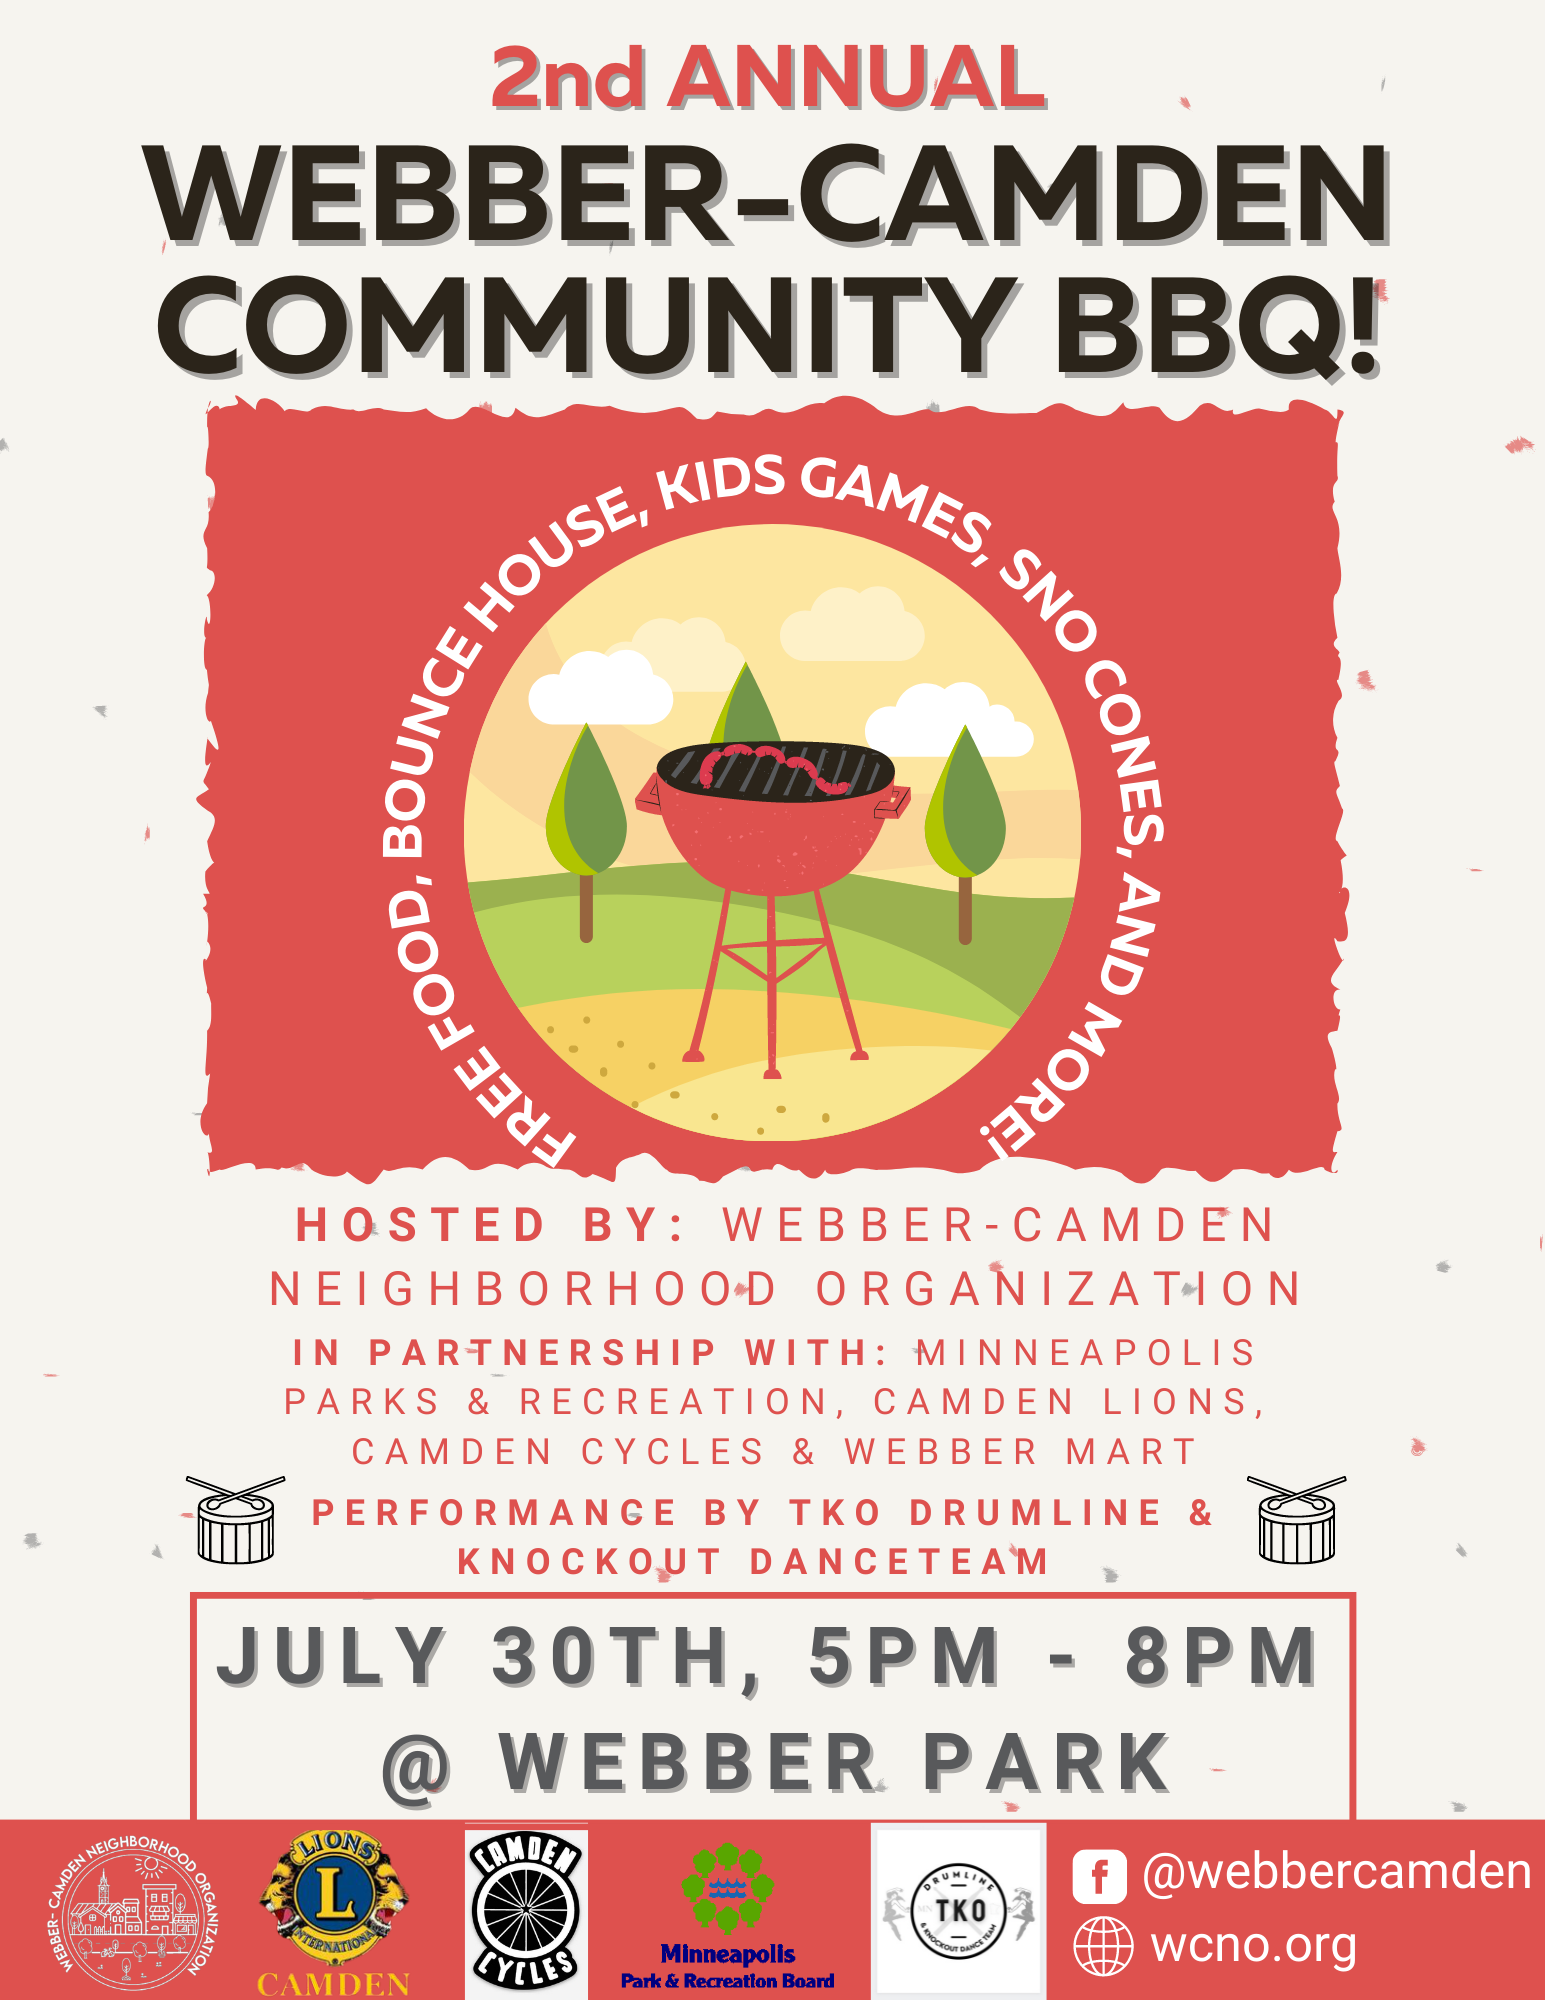 Promotional flyer for July BBQ